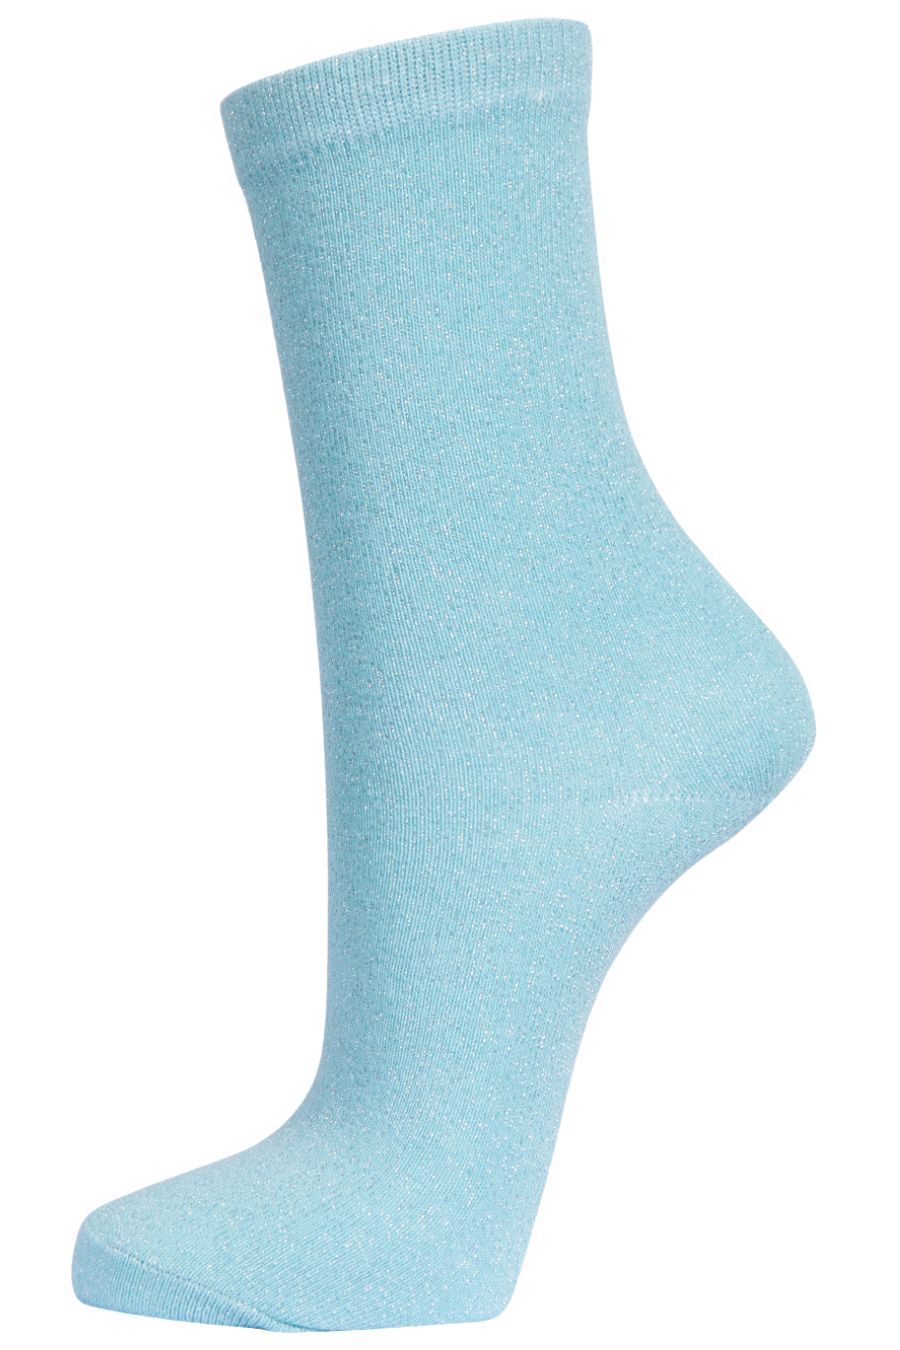 duck egg blue ankle socks with an all over silver glitter effect